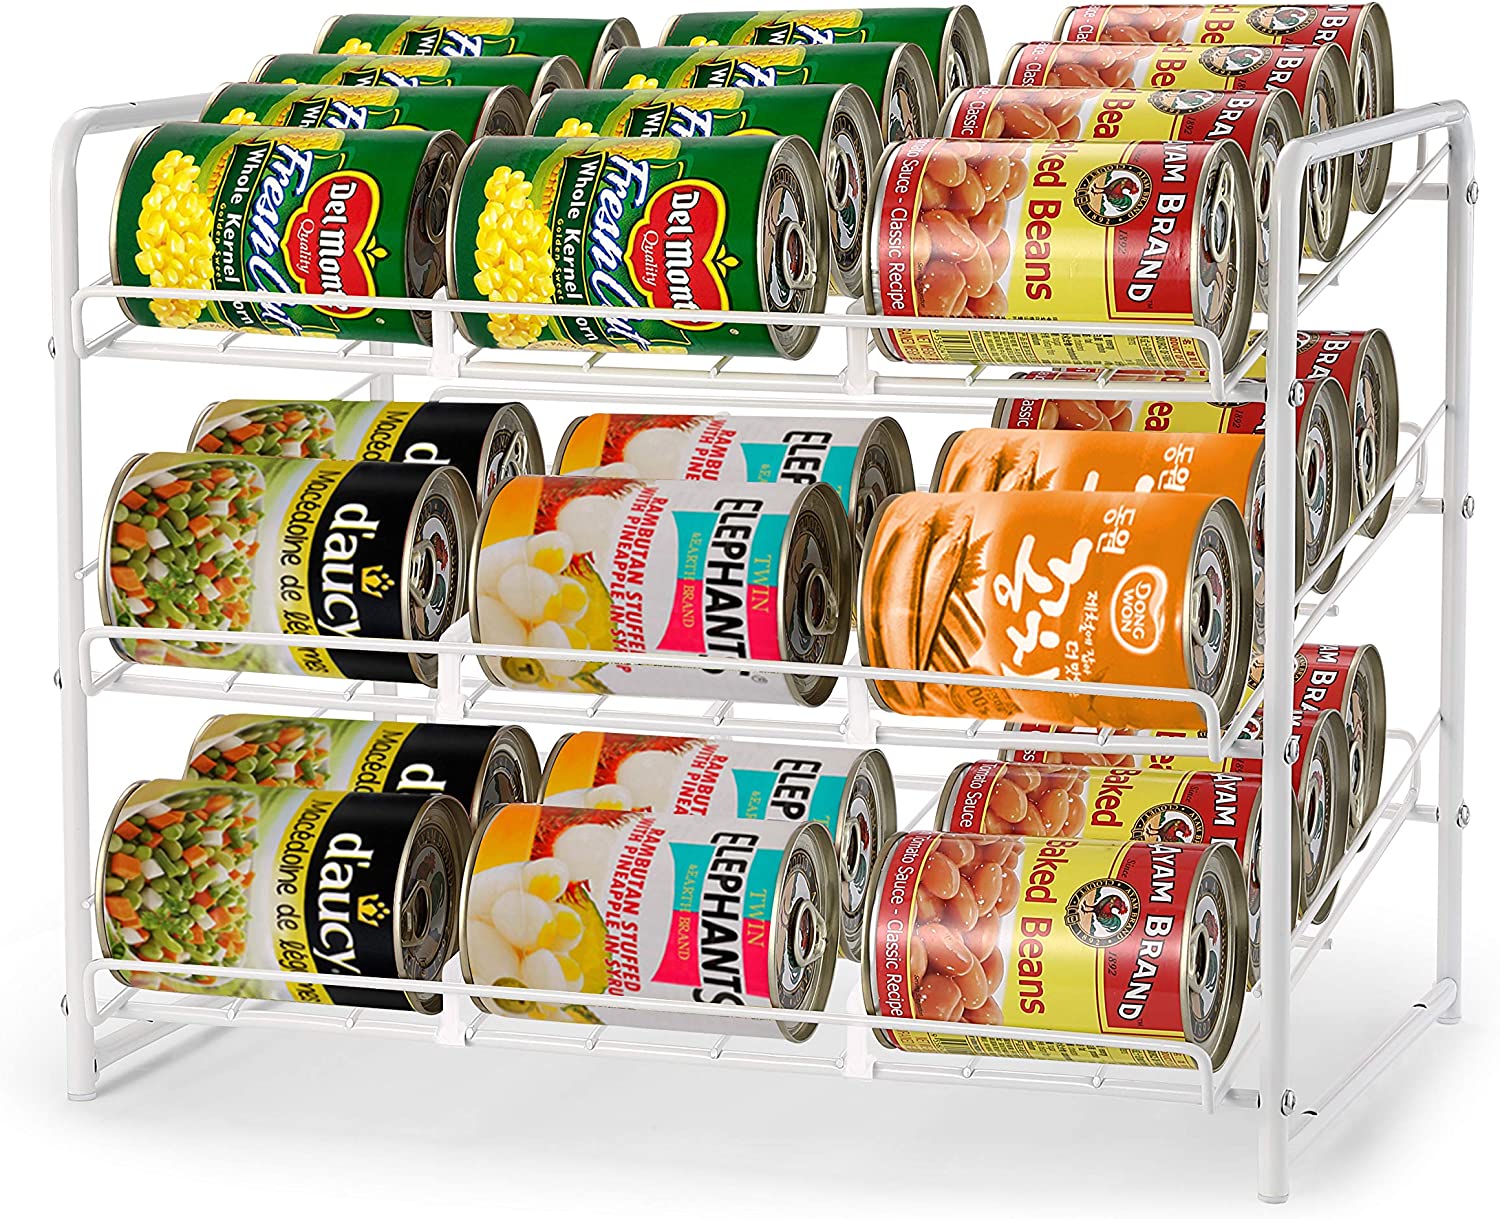 https://discounttoday.net/wp-content/uploads/2022/01/Simple-Trending-Can-Rack-Organizer-Stackable-Can-Storage-Dispenser-Holds-up-to-36-Cans-for-Kitchen-Cabinet-or-Pantry-White.jpg